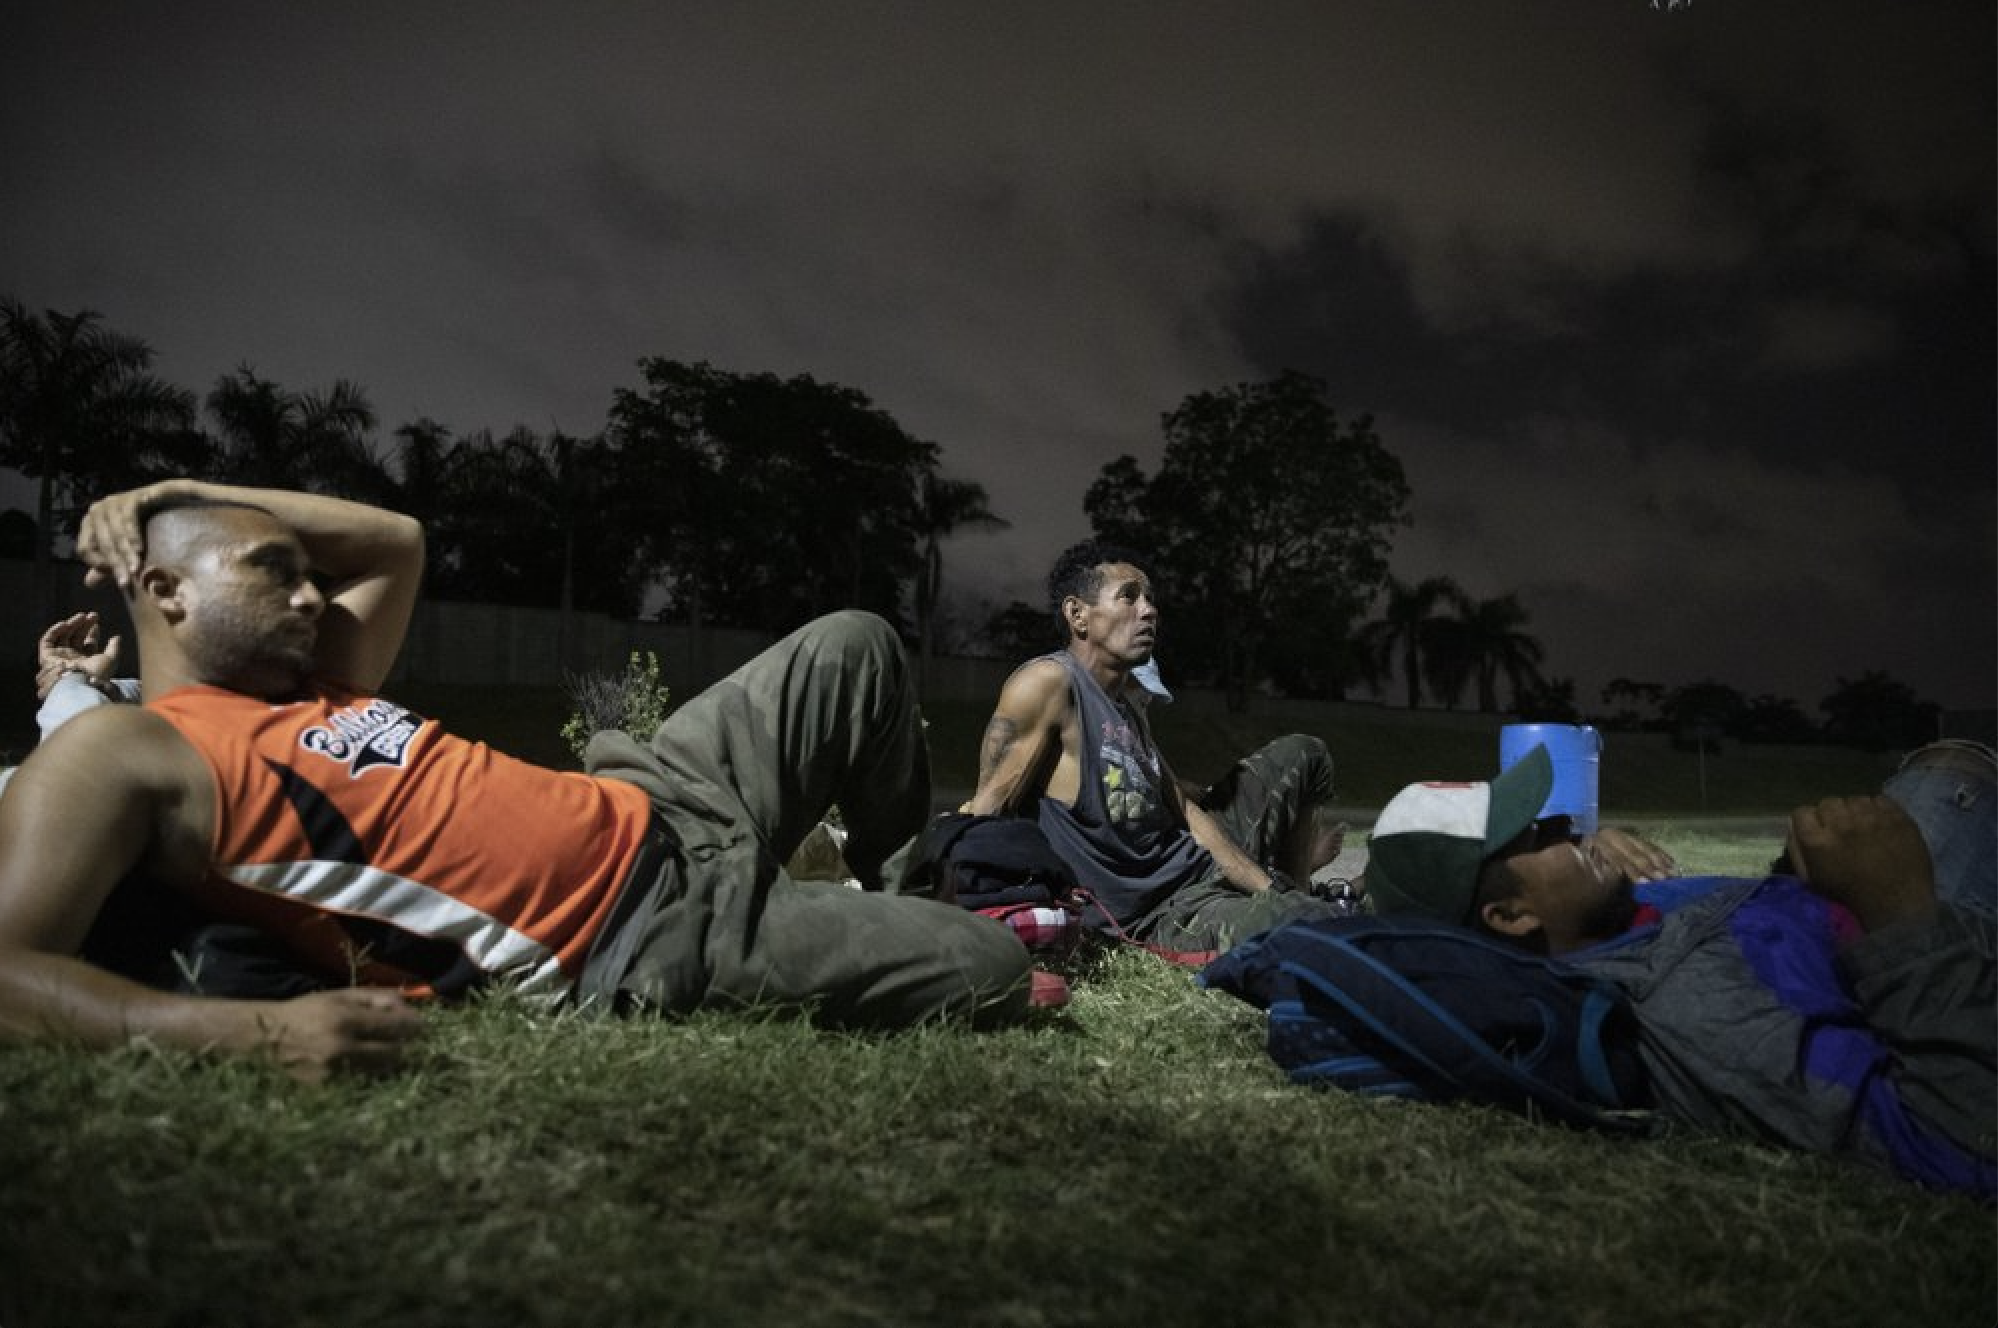 Hondurans deported from Mexico rest near a bus terminal in San Pedro Sula, Honduras, on Nov. 28, 2019, waiting for transportation to continue the trip back to their communities. The Trump Administration insists that Central Americans in danger already have safe havens. "For those of you who have legitimate asylum claims, we encourage them to go and seek assistance from the first neighboring country," Acting Customs and Border Protection Commissioner Mark Morgan recently told reporters. Image by Moises Castillo/ AP Photo. Honduras, 2019.